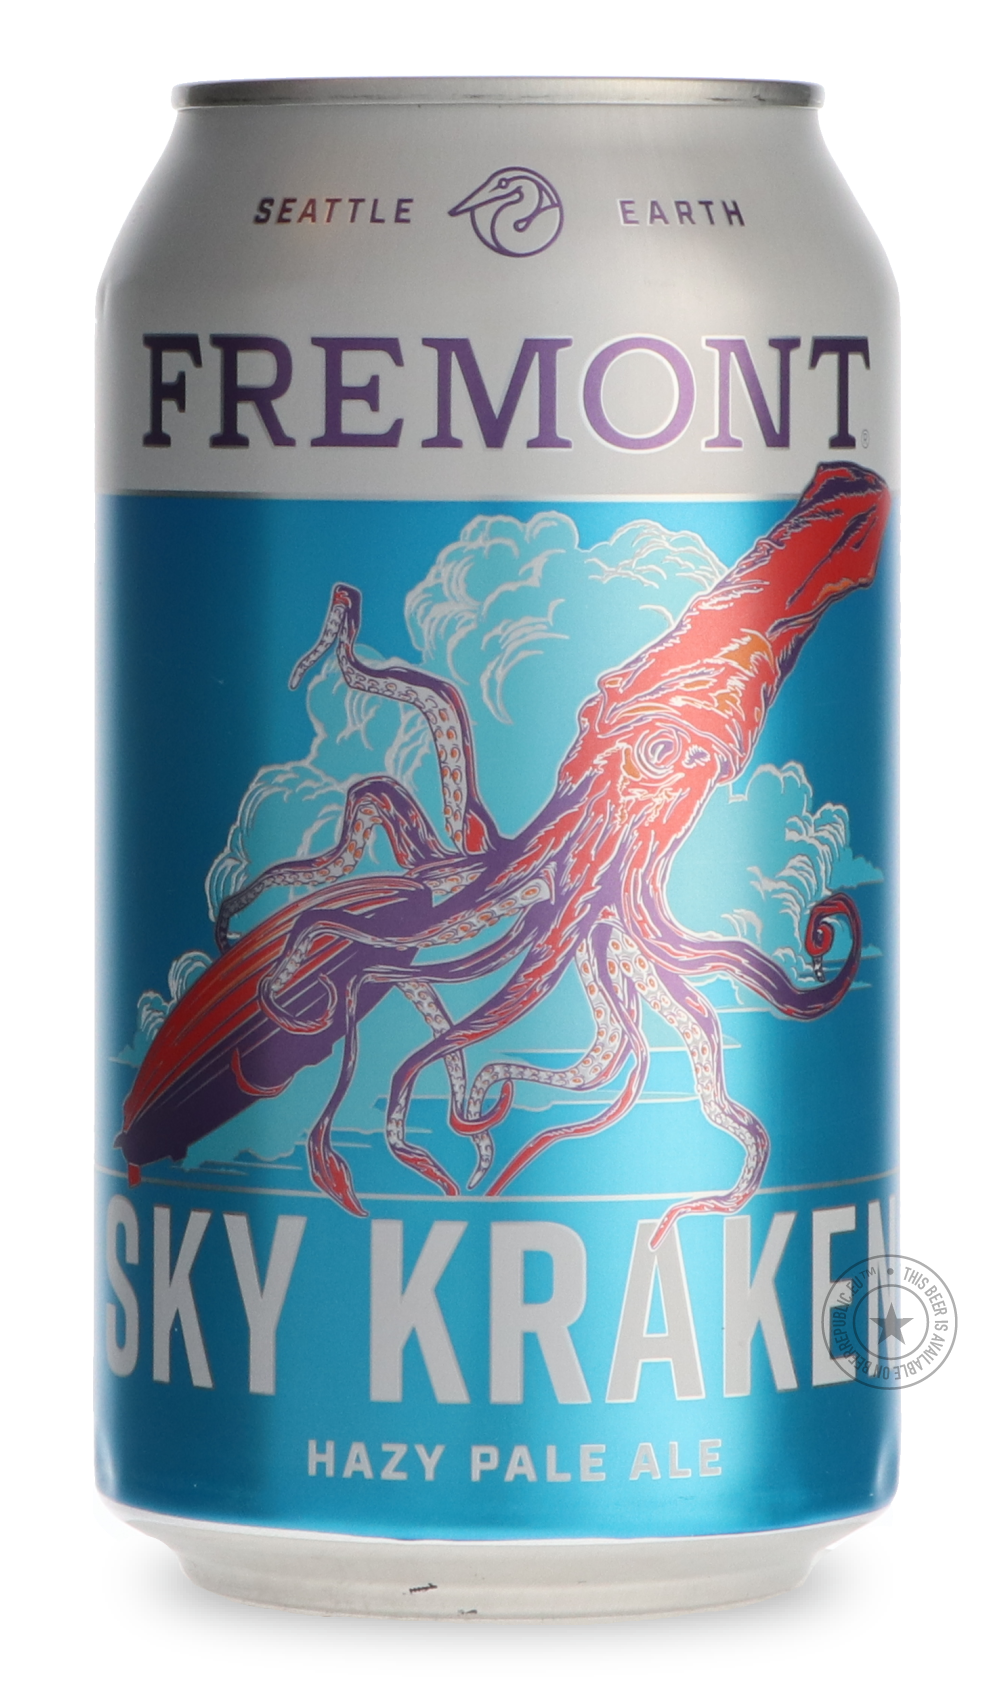 -Fremont- Sky Kraken-Pale- Only @ Beer Republic - The best online beer store for American & Canadian craft beer - Buy beer online from the USA and Canada - Bier online kopen - Amerikaans bier kopen - Craft beer store - Craft beer kopen - Amerikanisch bier kaufen - Bier online kaufen - Acheter biere online - IPA - Stout - Porter - New England IPA - Hazy IPA - Imperial Stout - Barrel Aged - Barrel Aged Imperial Stout - Brown - Dark beer - Blond - Blonde - Pilsner - Lager - Wheat - Weizen - Amber - Barley Wine